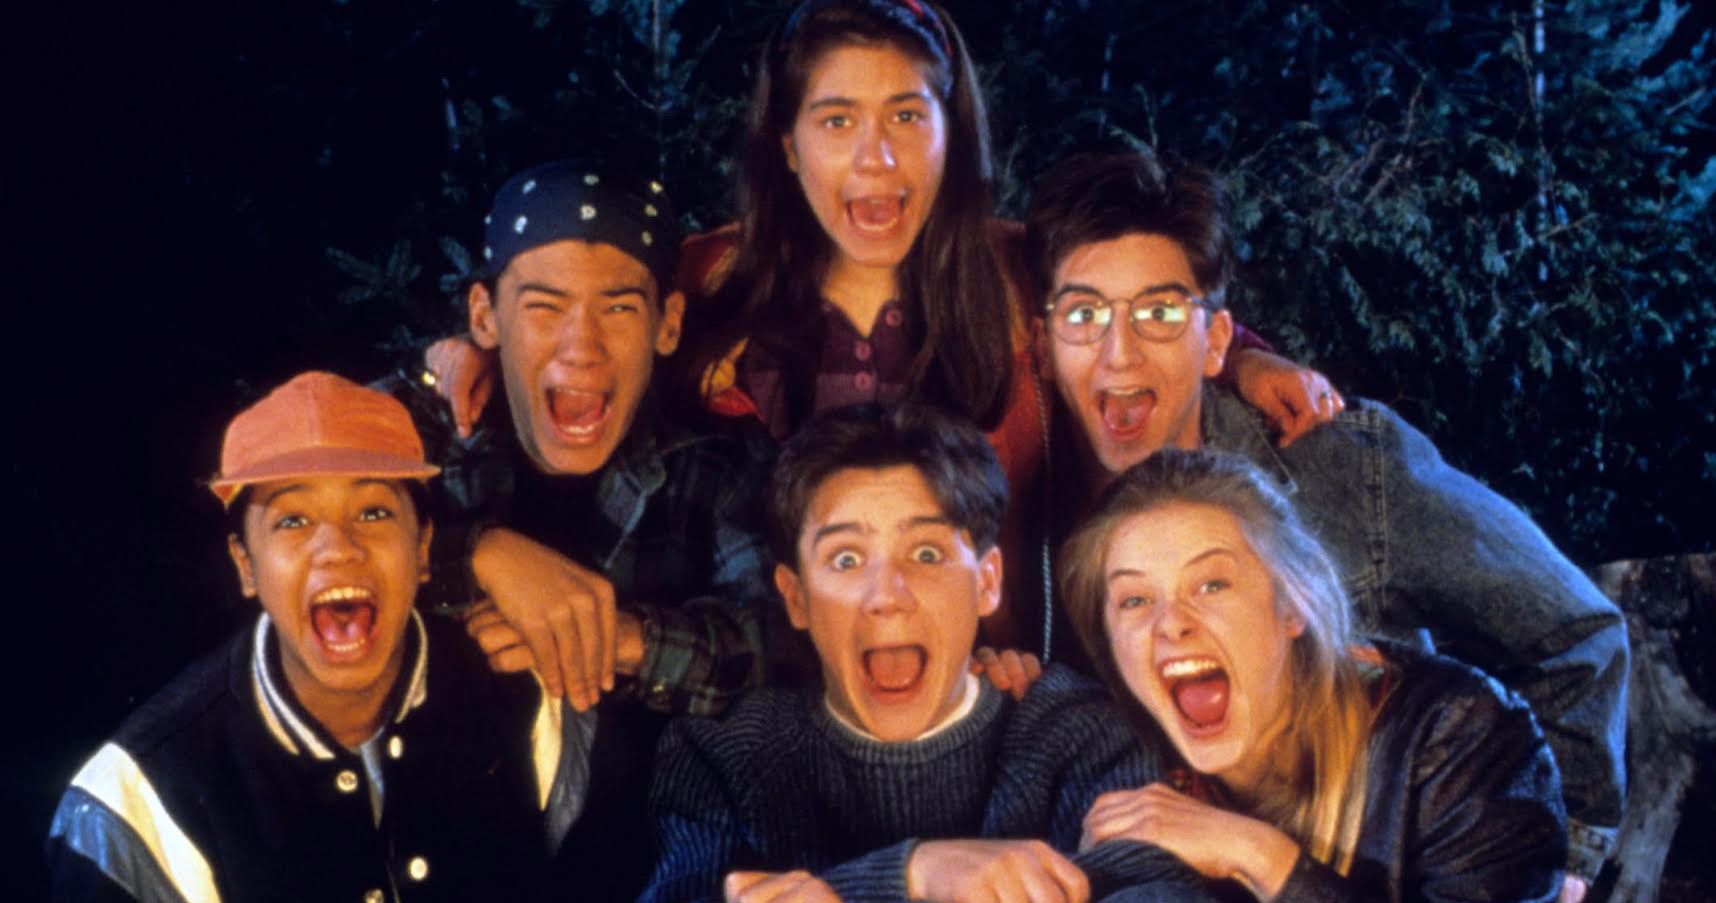 Are You Afraid of the Dark? Revival Is Coming to Nickelodeon This Halloween